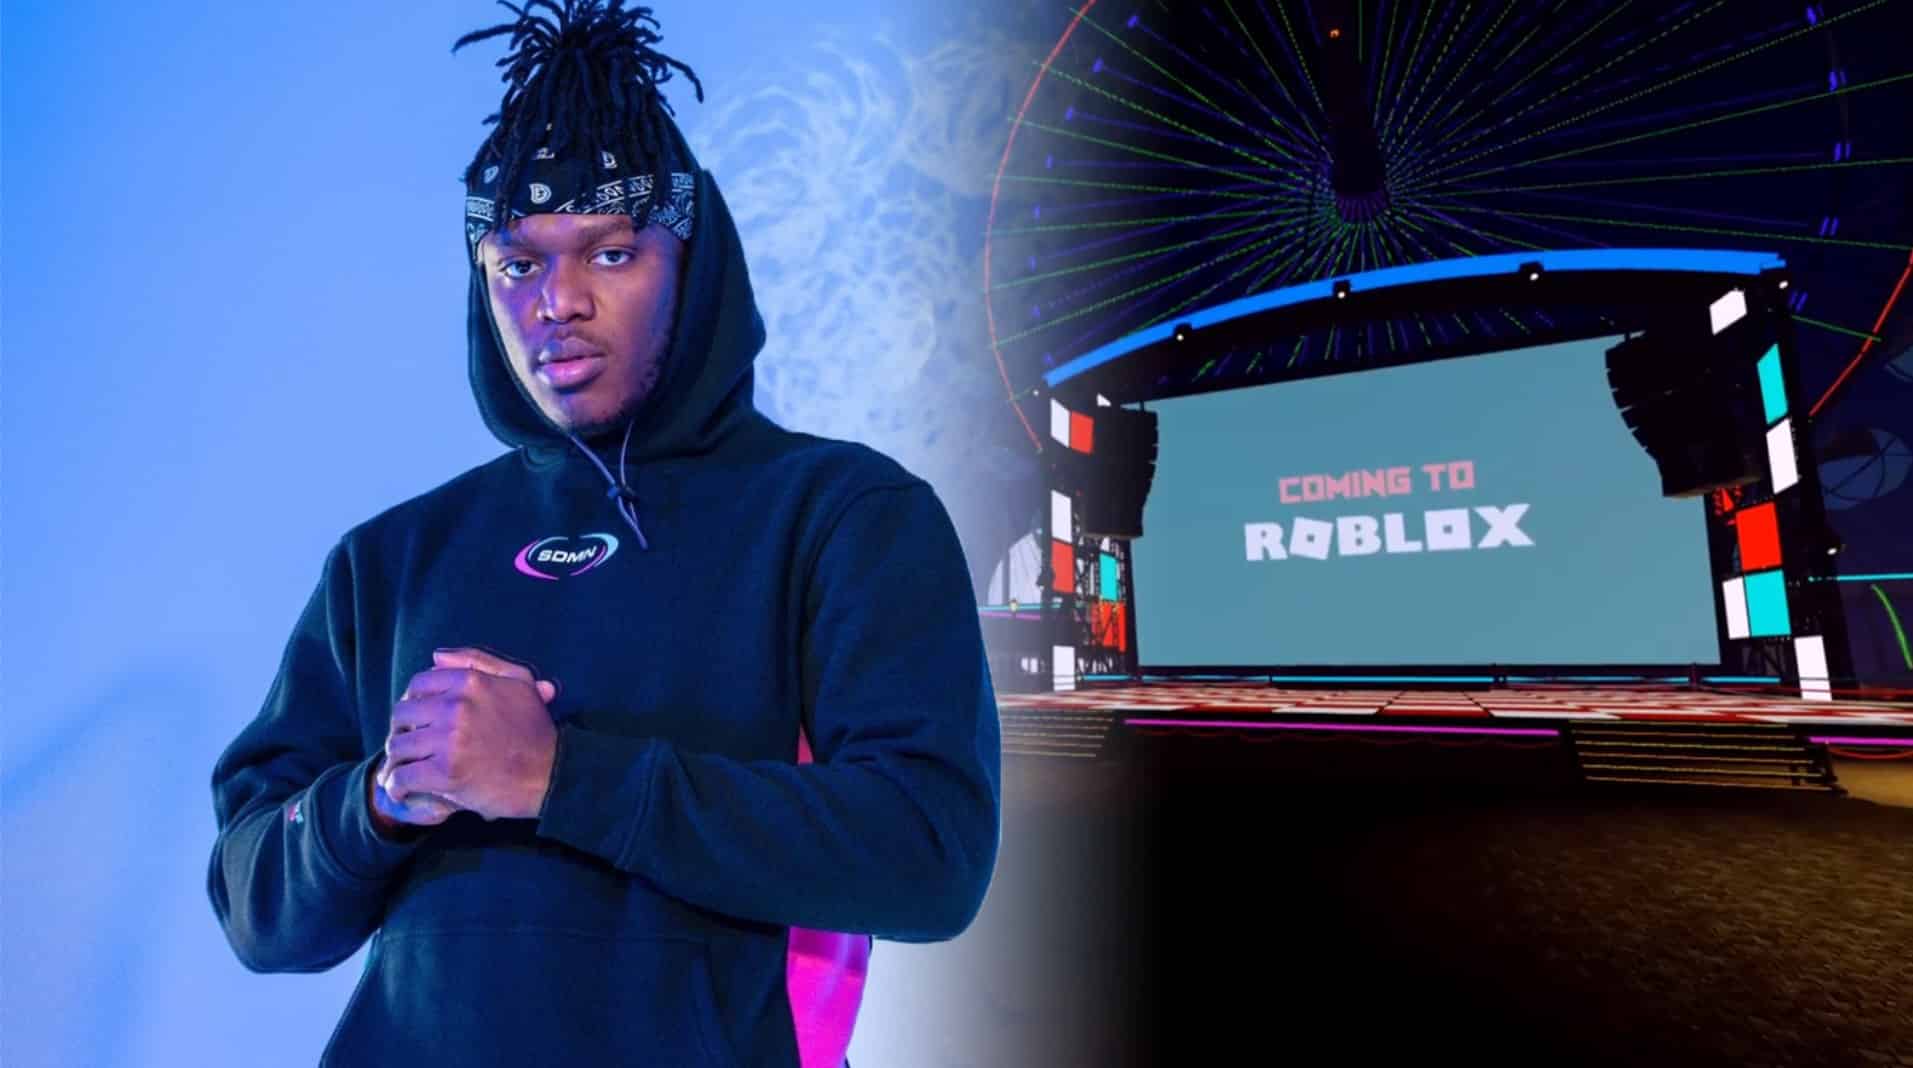 ROBLOX NEWS: New FREE Event Items, KSI Concert, Leaked Items, New